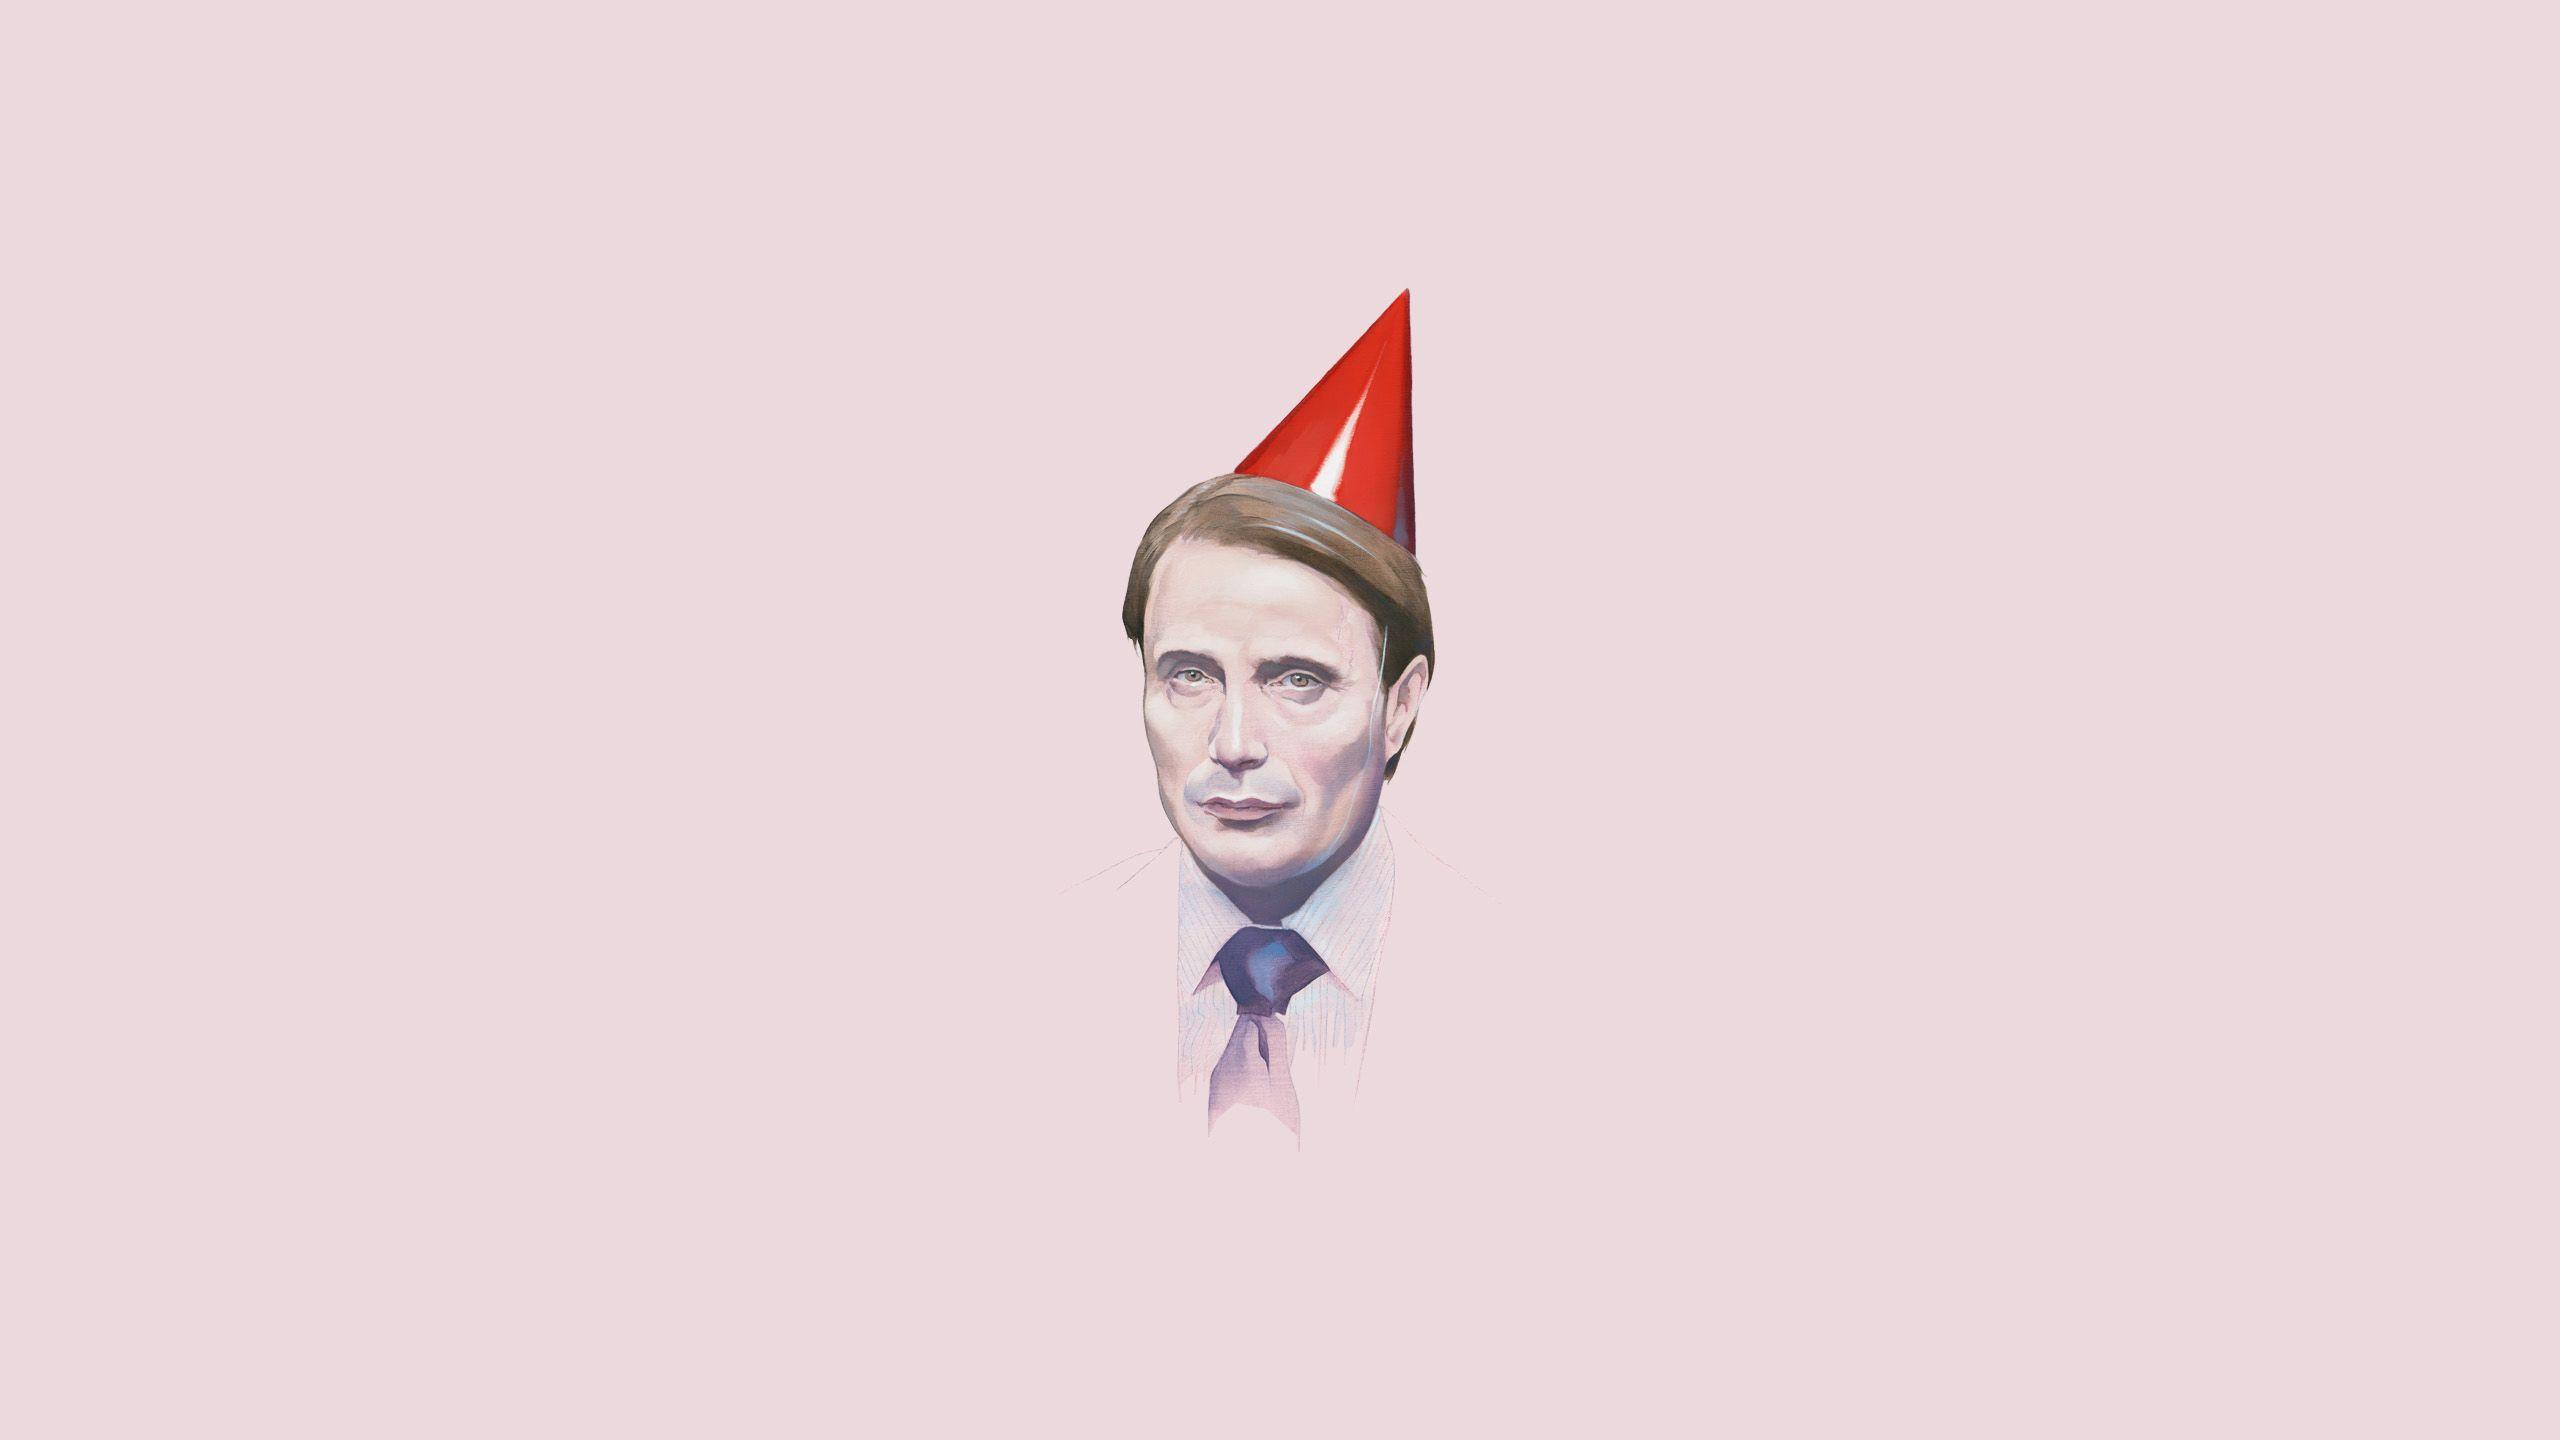 Hannibal the party animal wallpaper • meh.ro